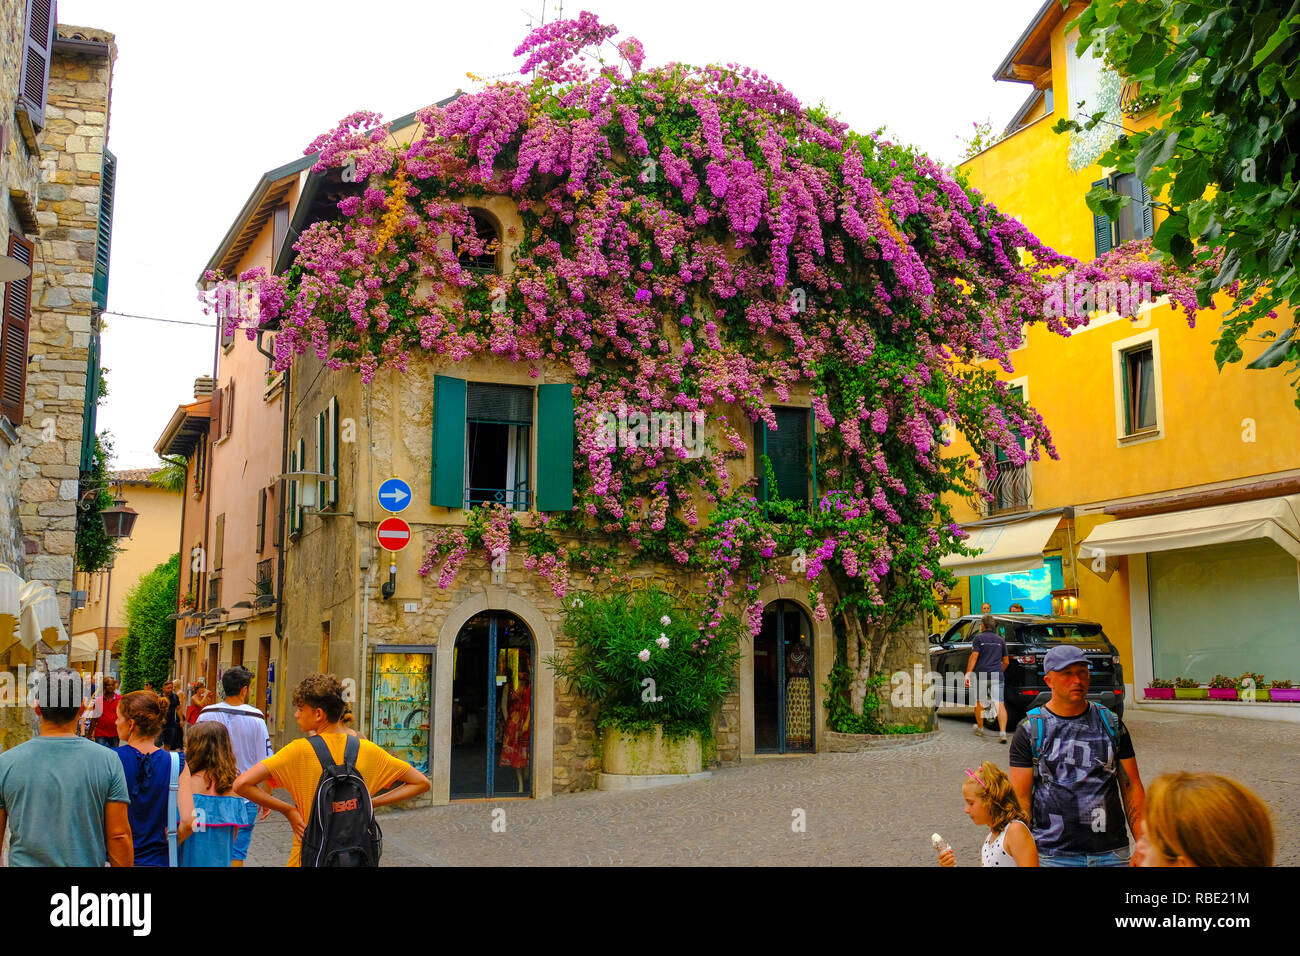 Sirmione, Italy - August 09, 2018: People are walking on colorful streets of Sirmione Italian town on Garda Lake. Italy Stock Photo